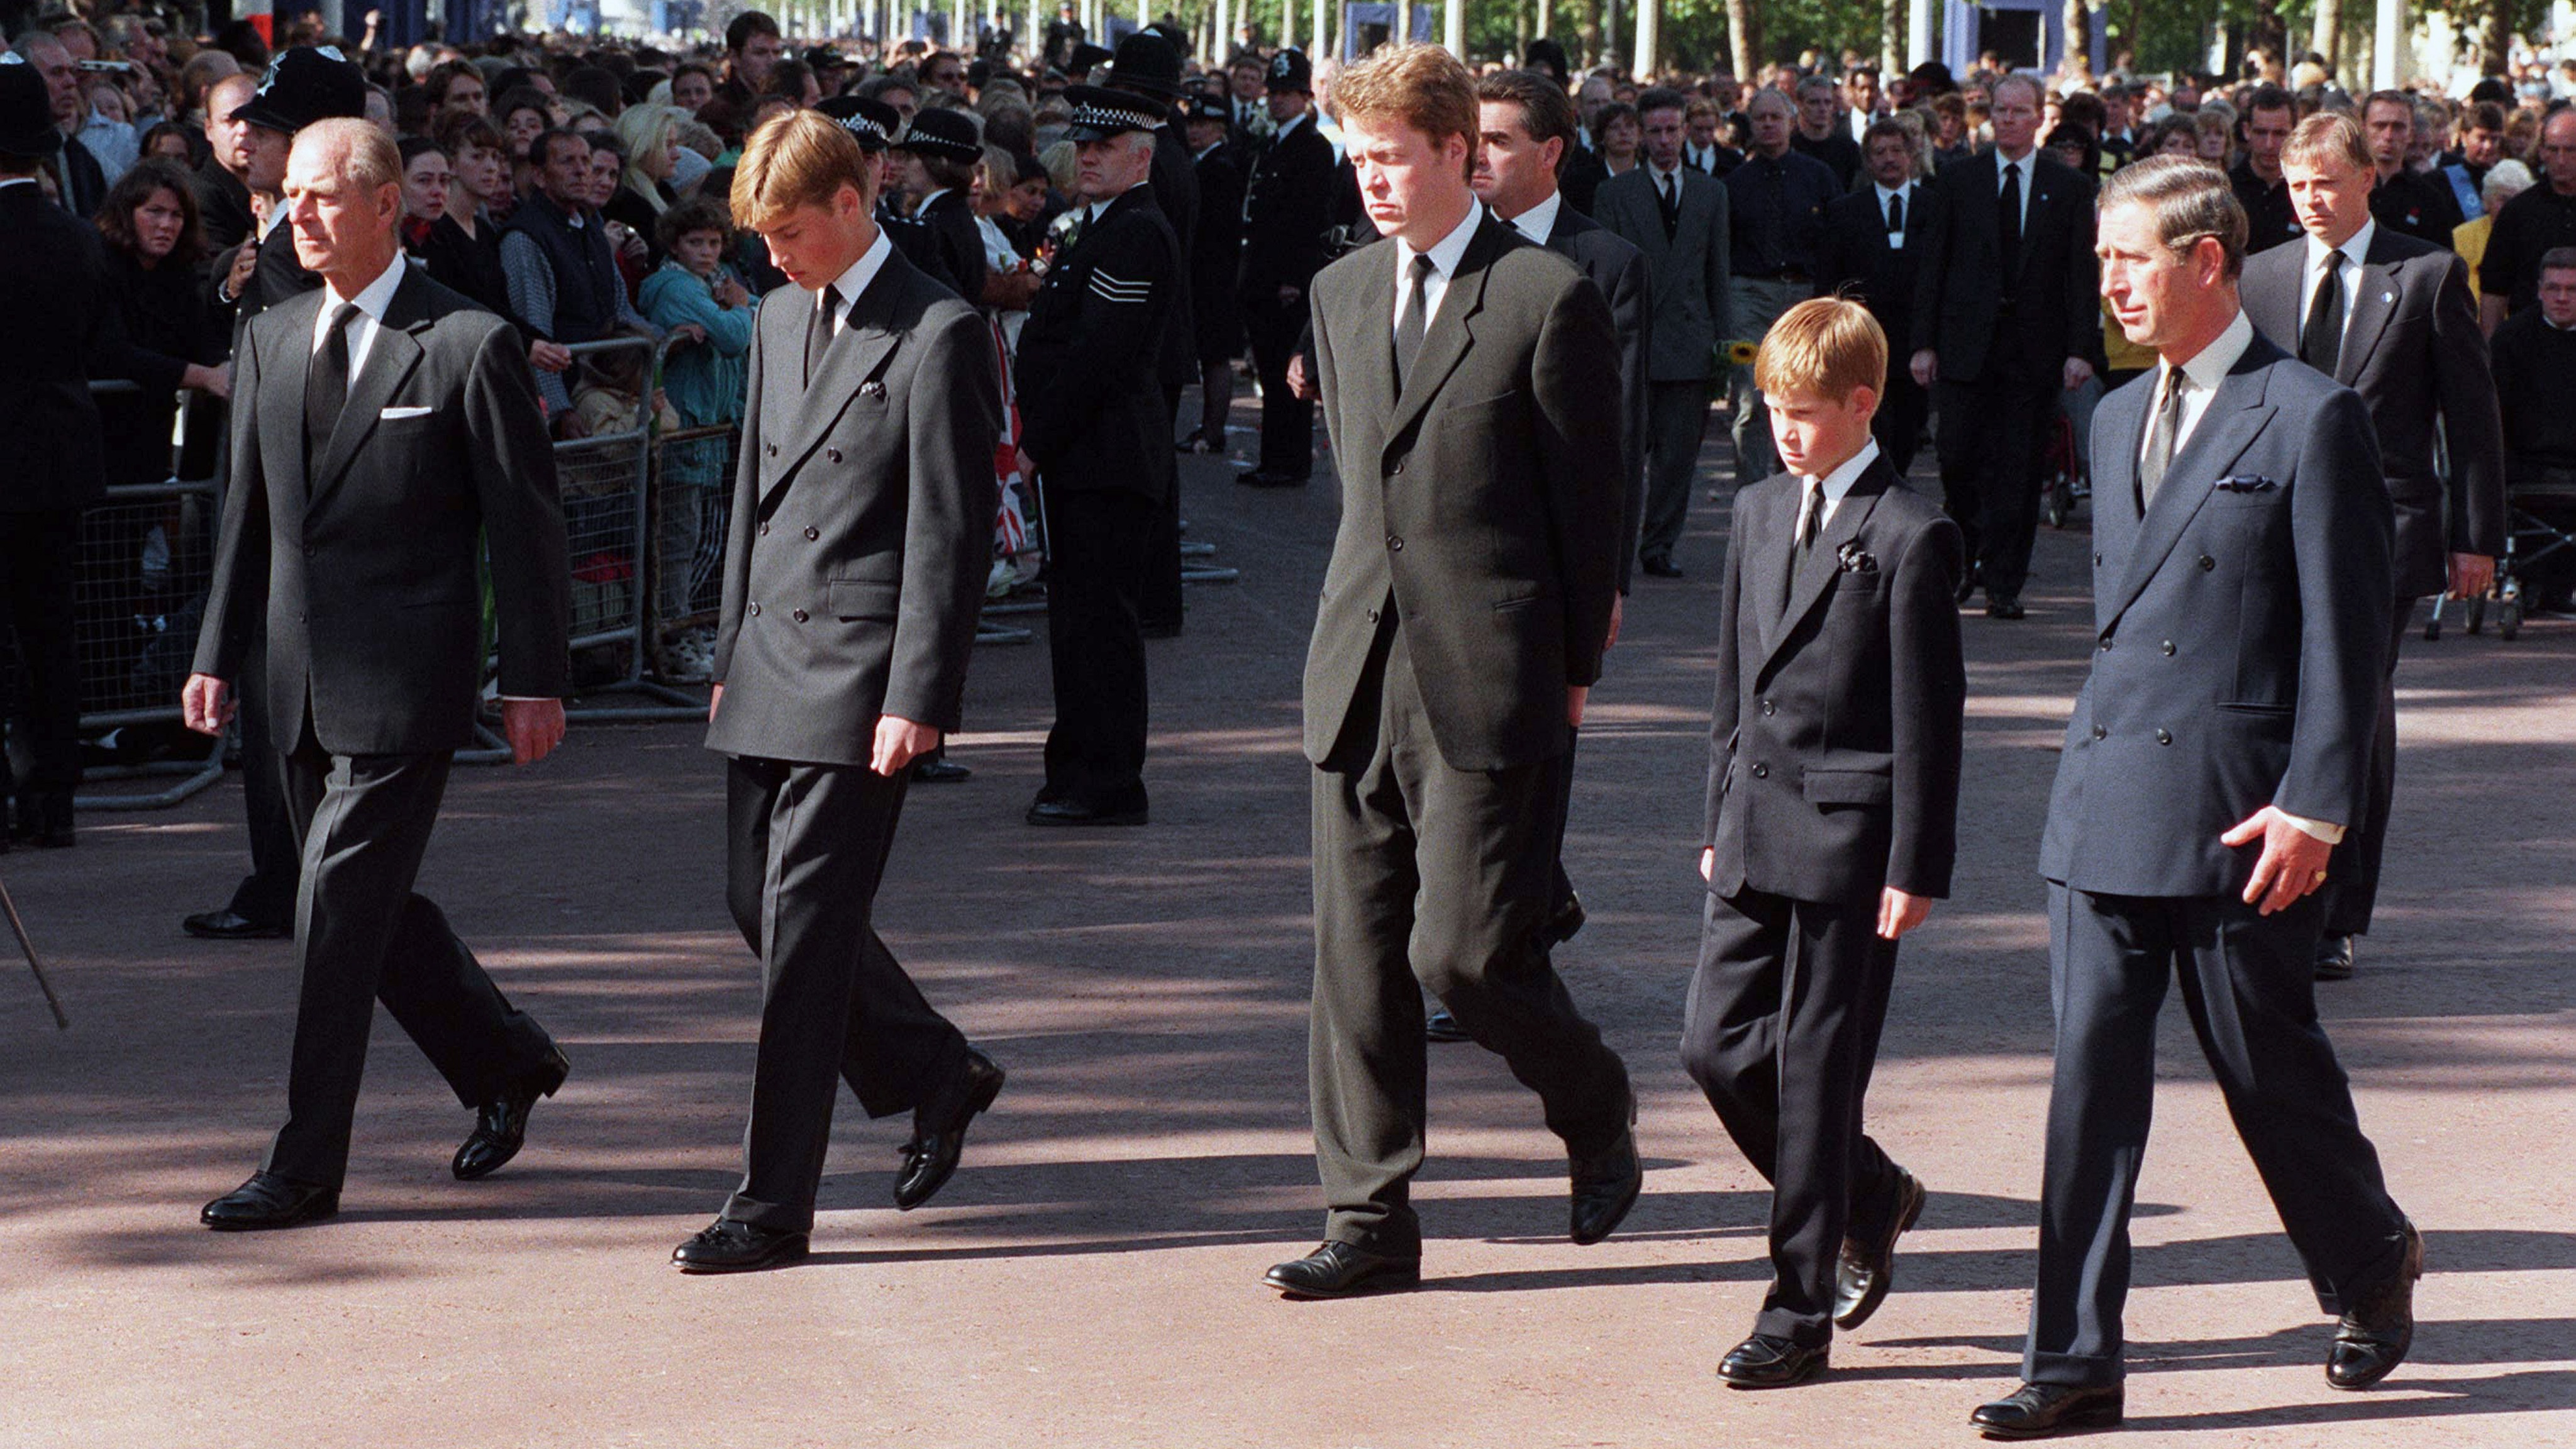 Princess Diana's funeral: How the world laid the People's Princess to rest  | Daily Mail Online